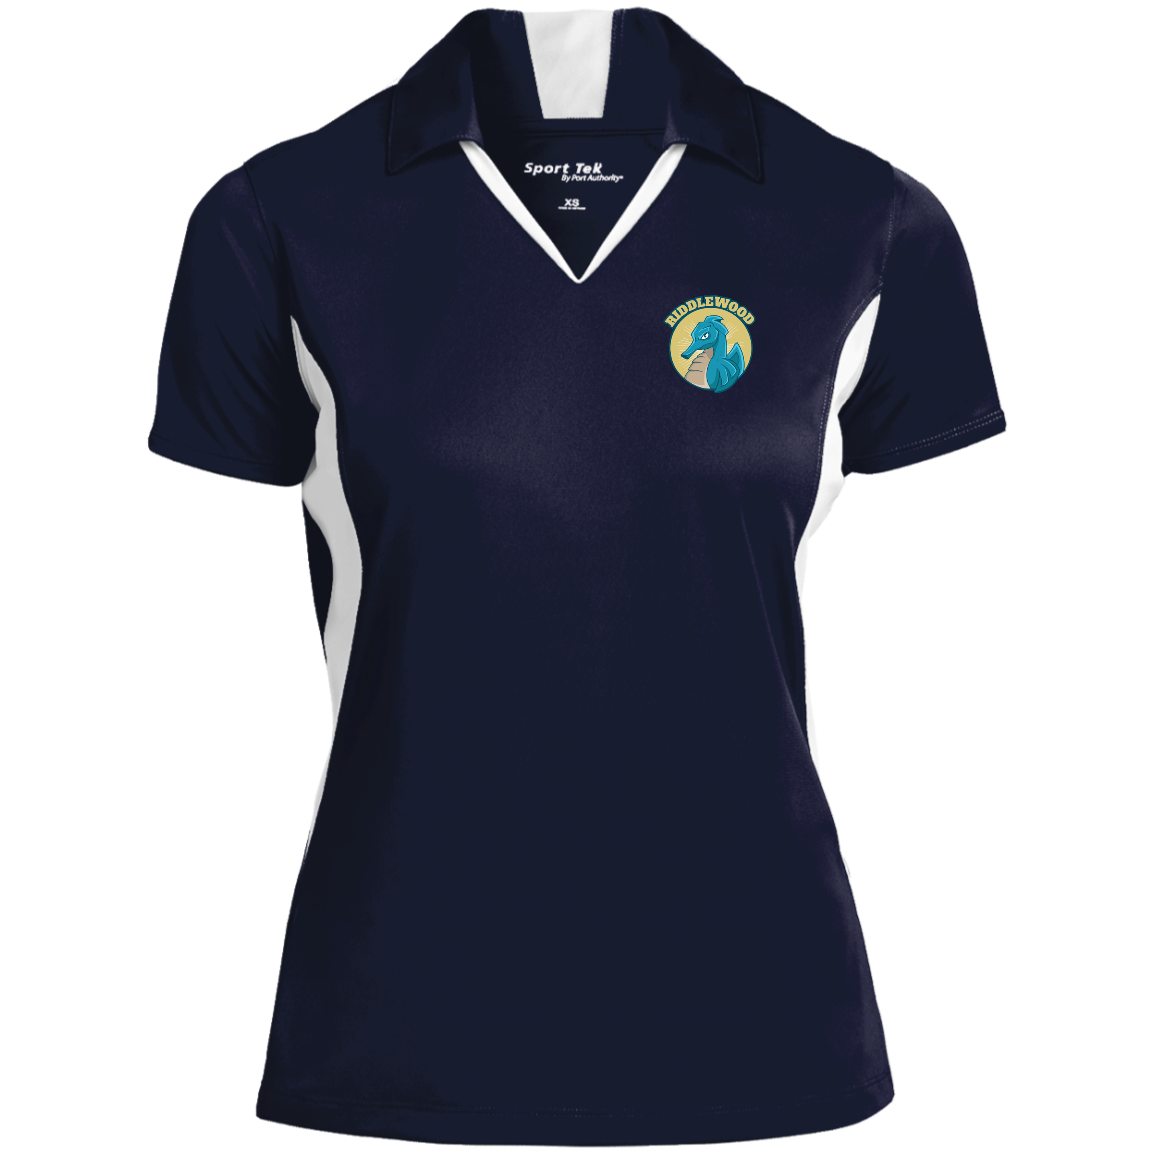 Riddlewood TeamStore Ladies' Colorblock Performance Polo